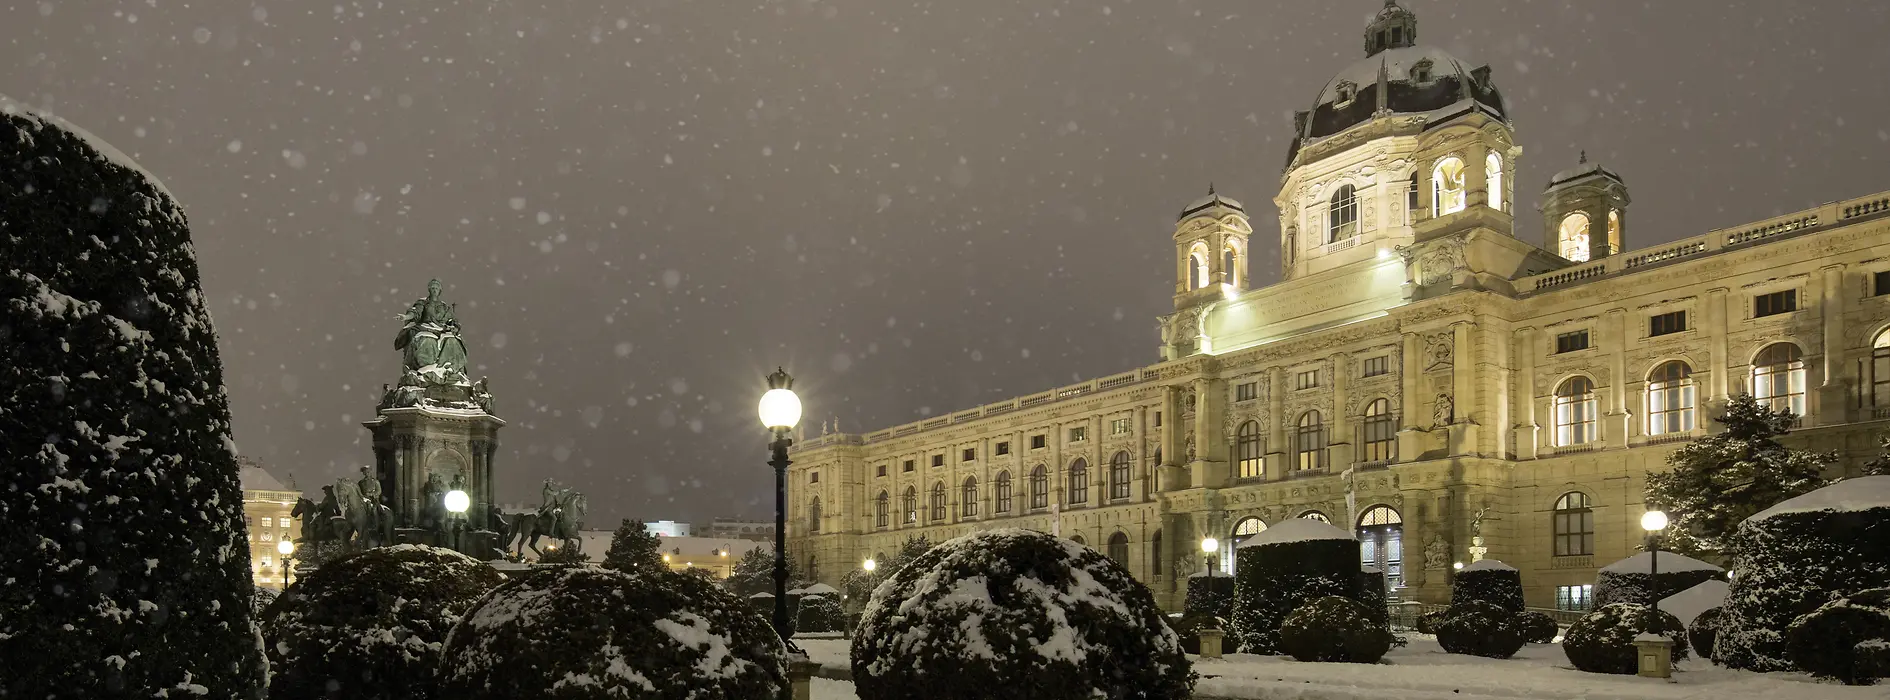 Naturhistorisches Museum Vienna (Natural History Museum) in the winter snow